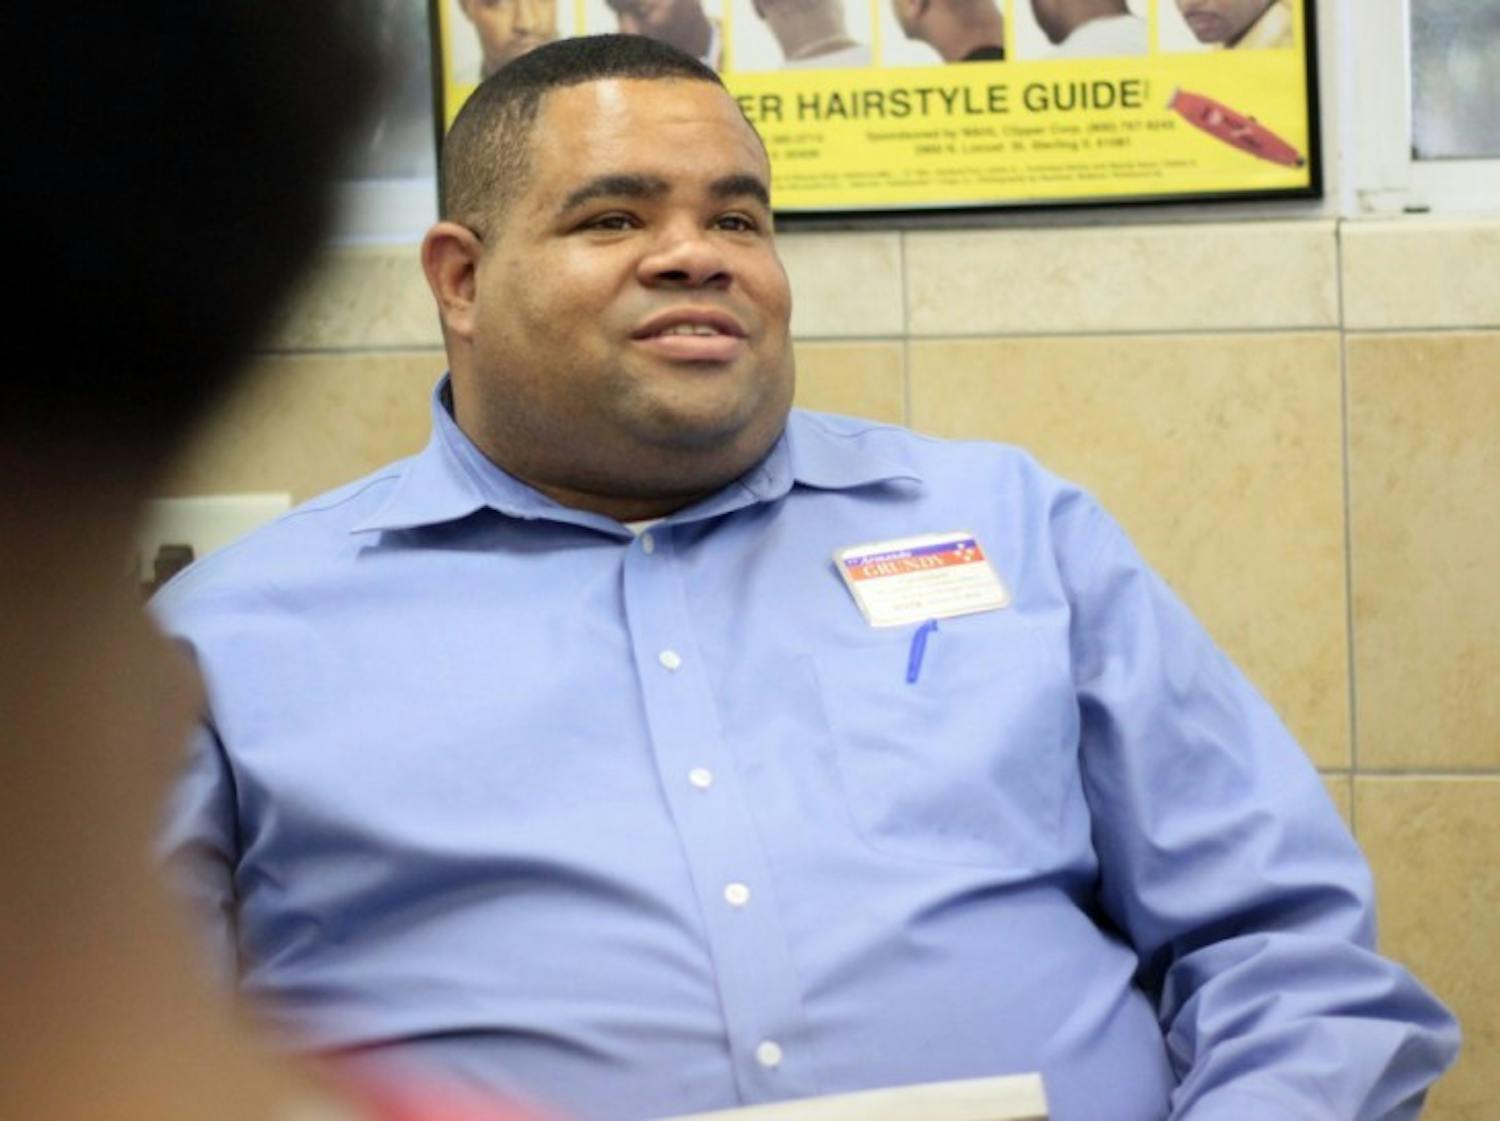 Armando Grundy, 32, is one of three candidates running for Gainesville City Commission, District 1.